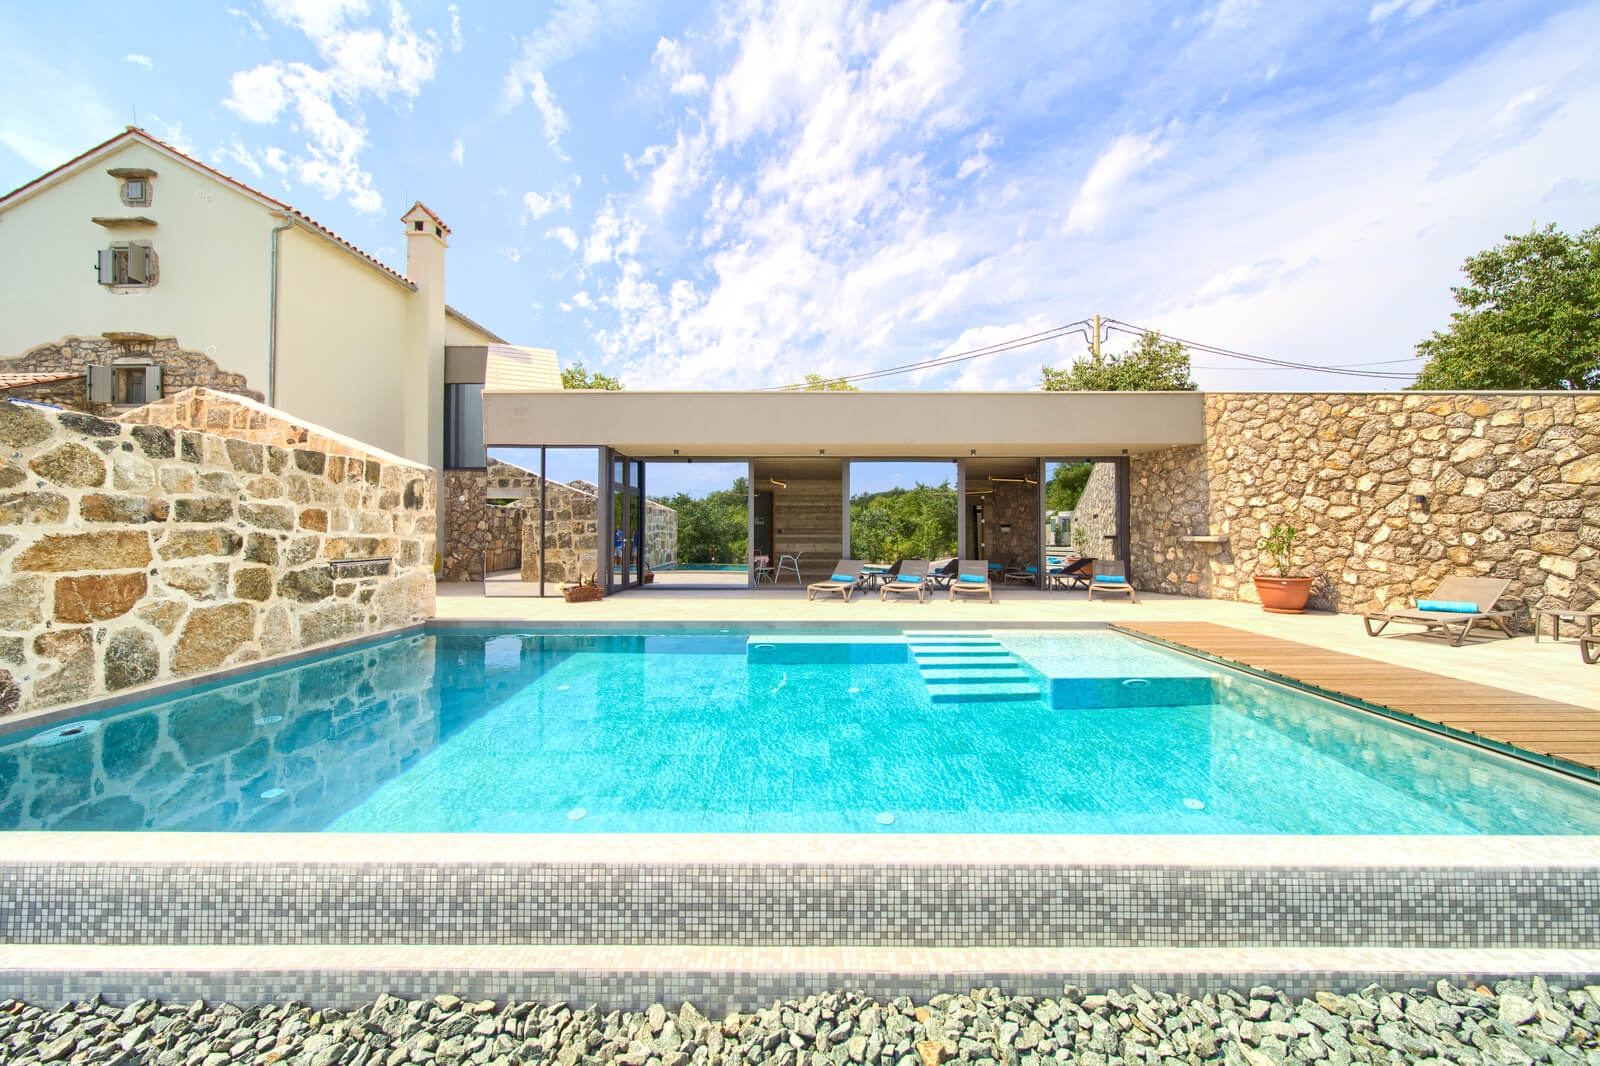 Luxury Villa Jerini House for rent with swimming pool and Spa zone on the island of Krk